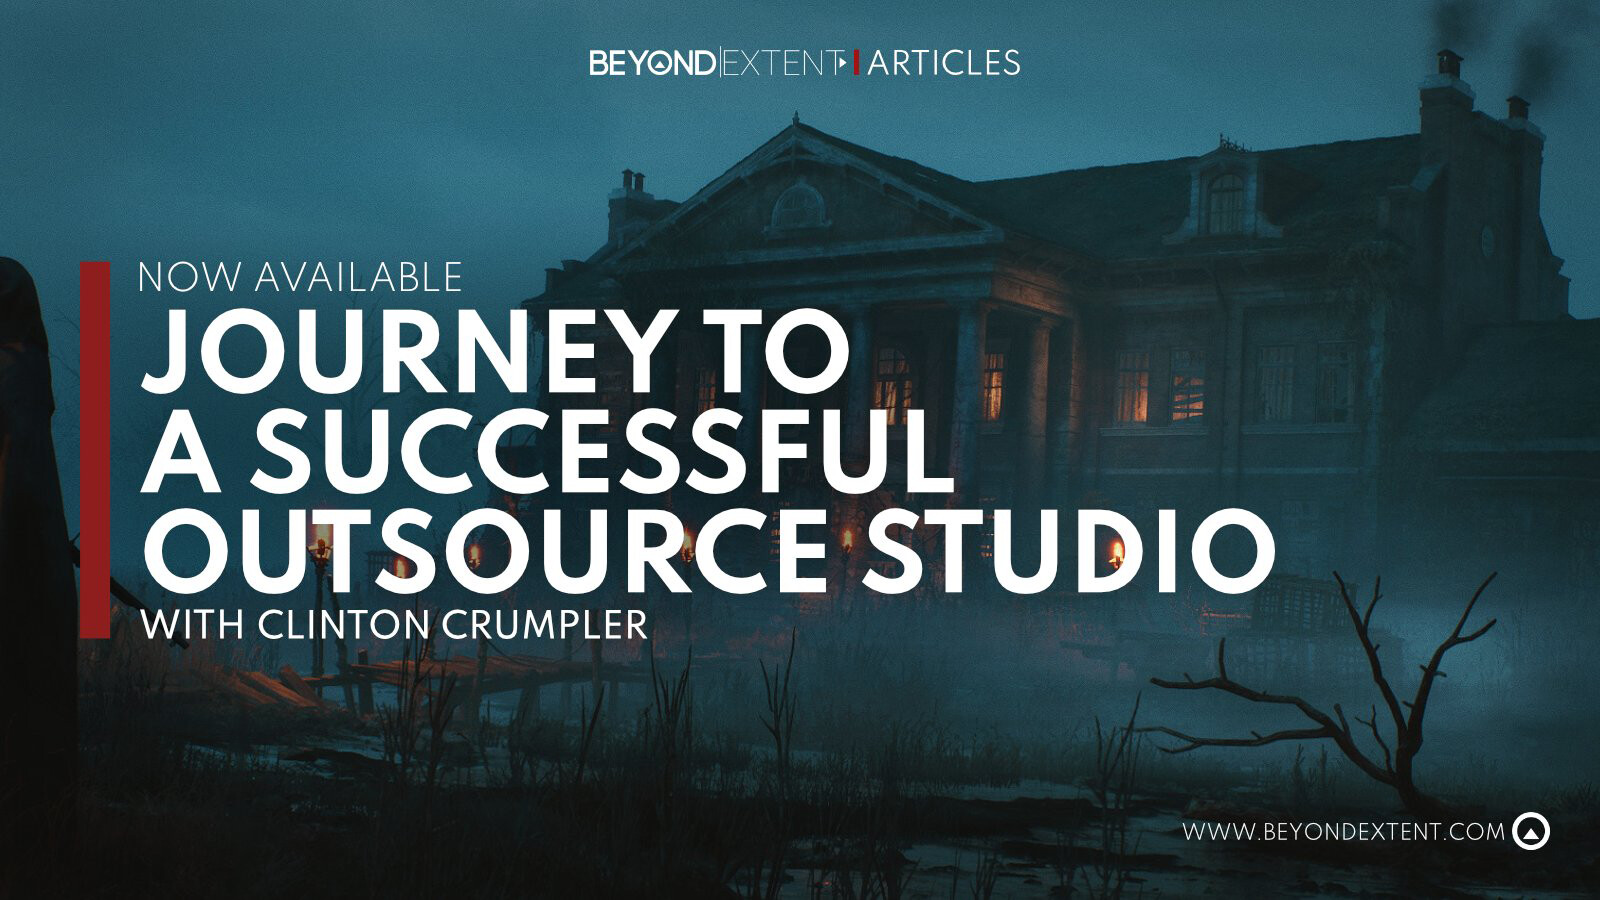 https://www.beyondextent.com/articles/journey-to-a-successful-game-art-outsource-studio#Chapter-Three